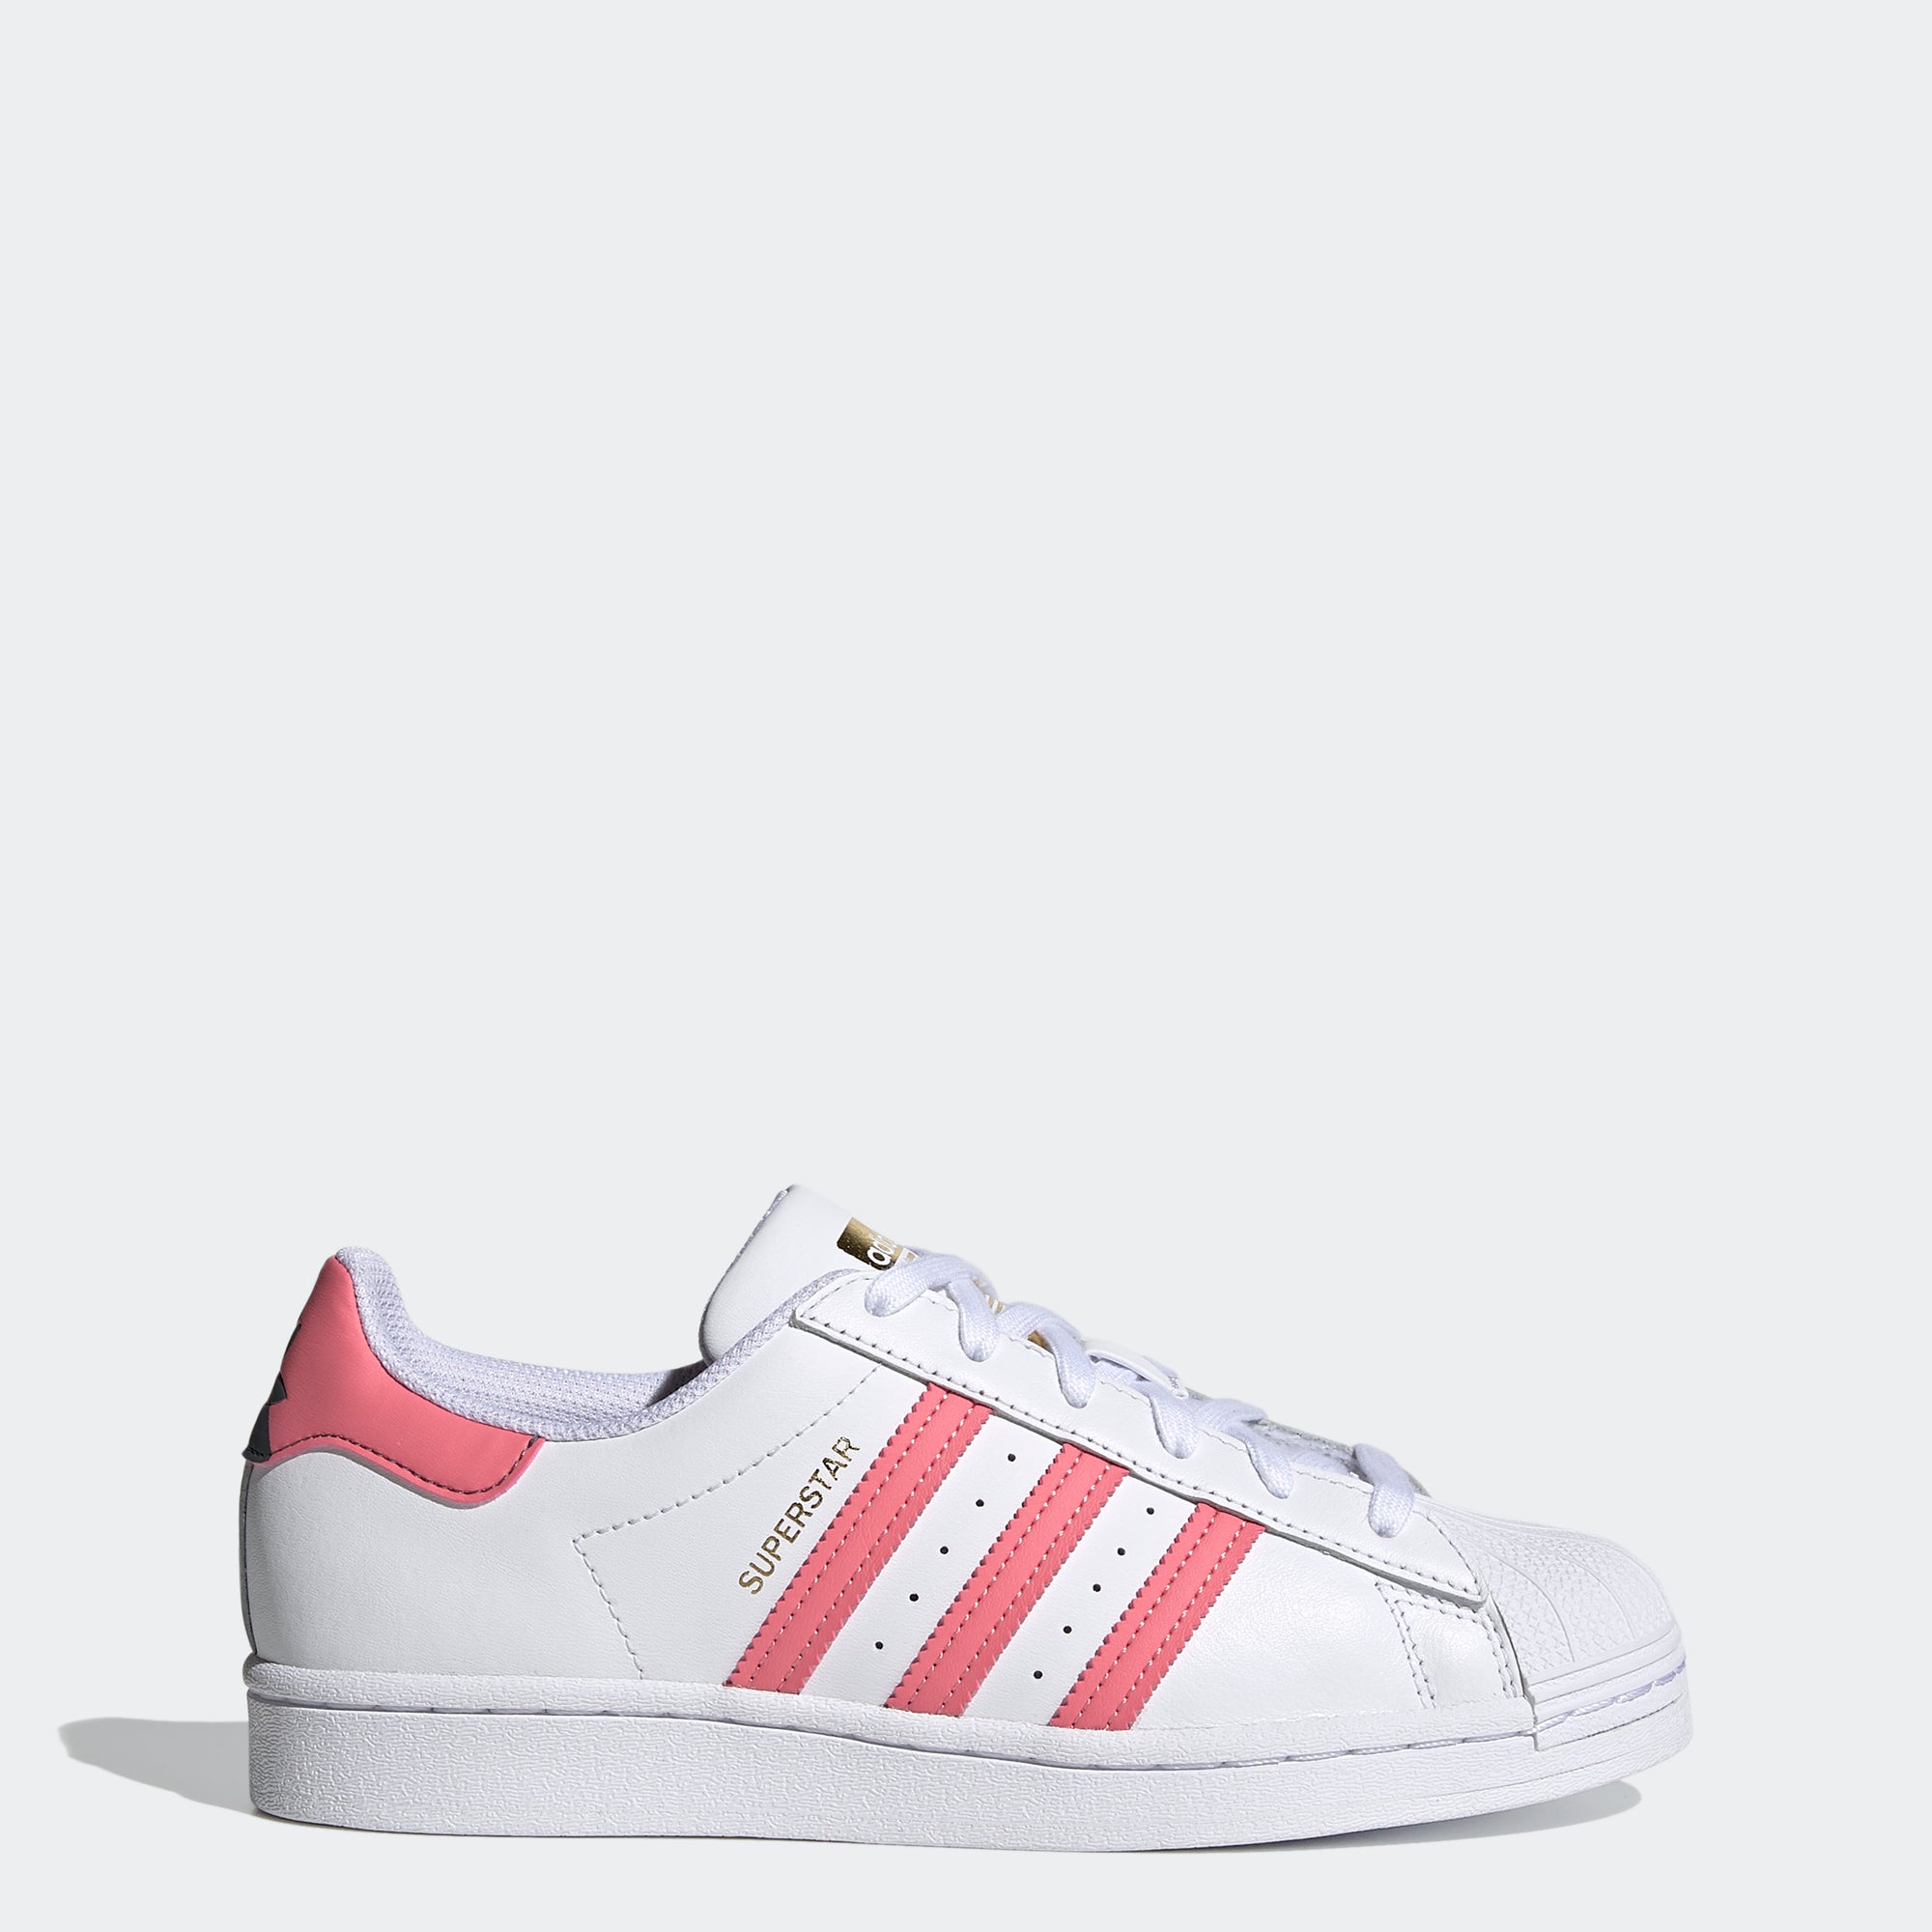 Women's shoes adidas Superstar W Ftw White/ Ftw White/ Ftw White